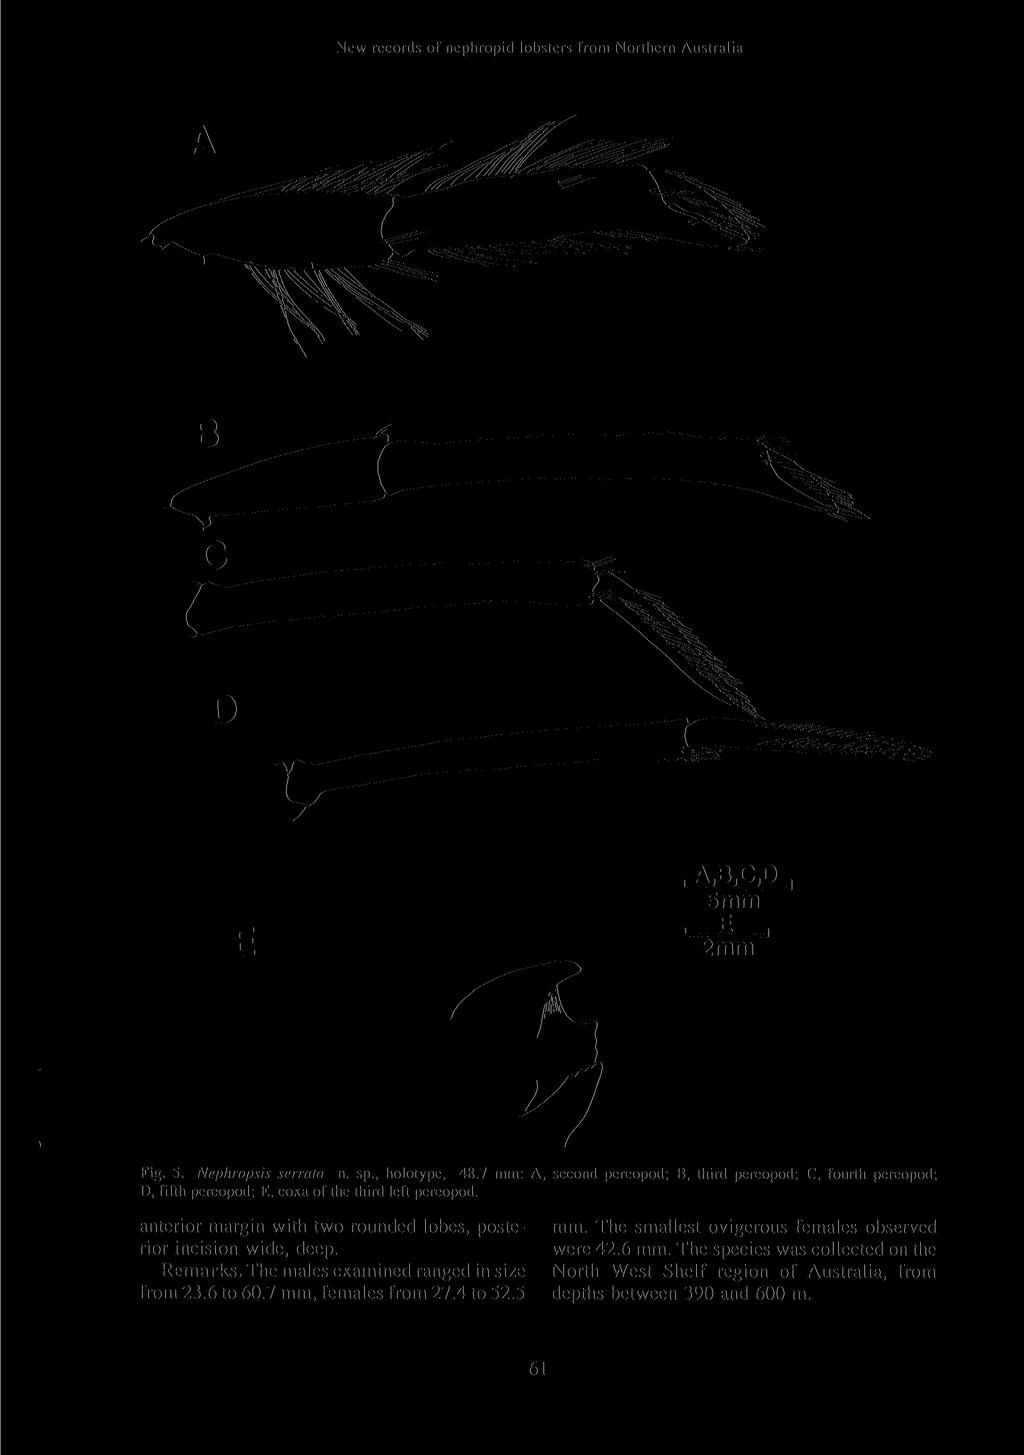 New records of nephropid lobsters from Northern Australia A,B,C,P, 5mm E, 2mm Fig. 5. Nephropsis serrata n. sp., holotype, 48.